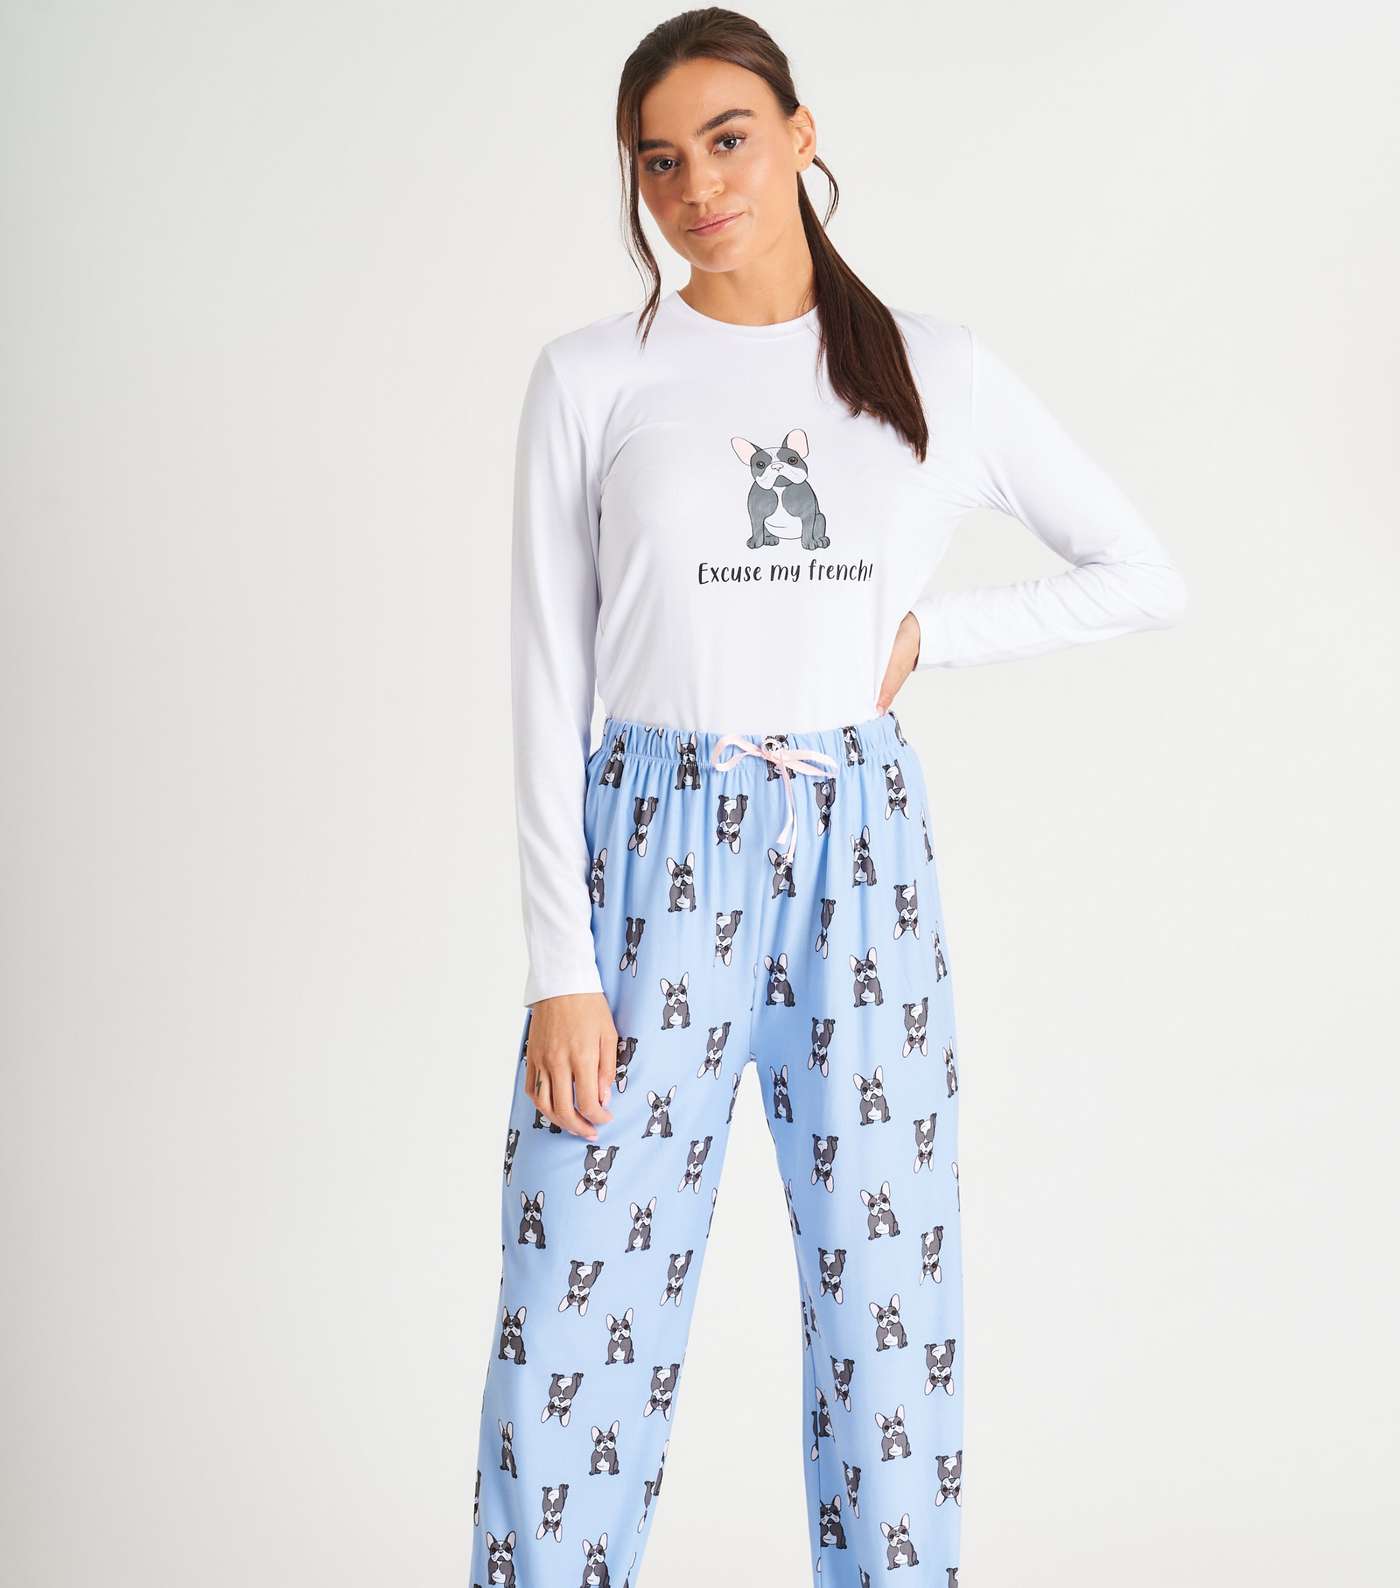 Loungeable Pale Blue Trouser Pyjama Set with French Bulldog Print Image 3